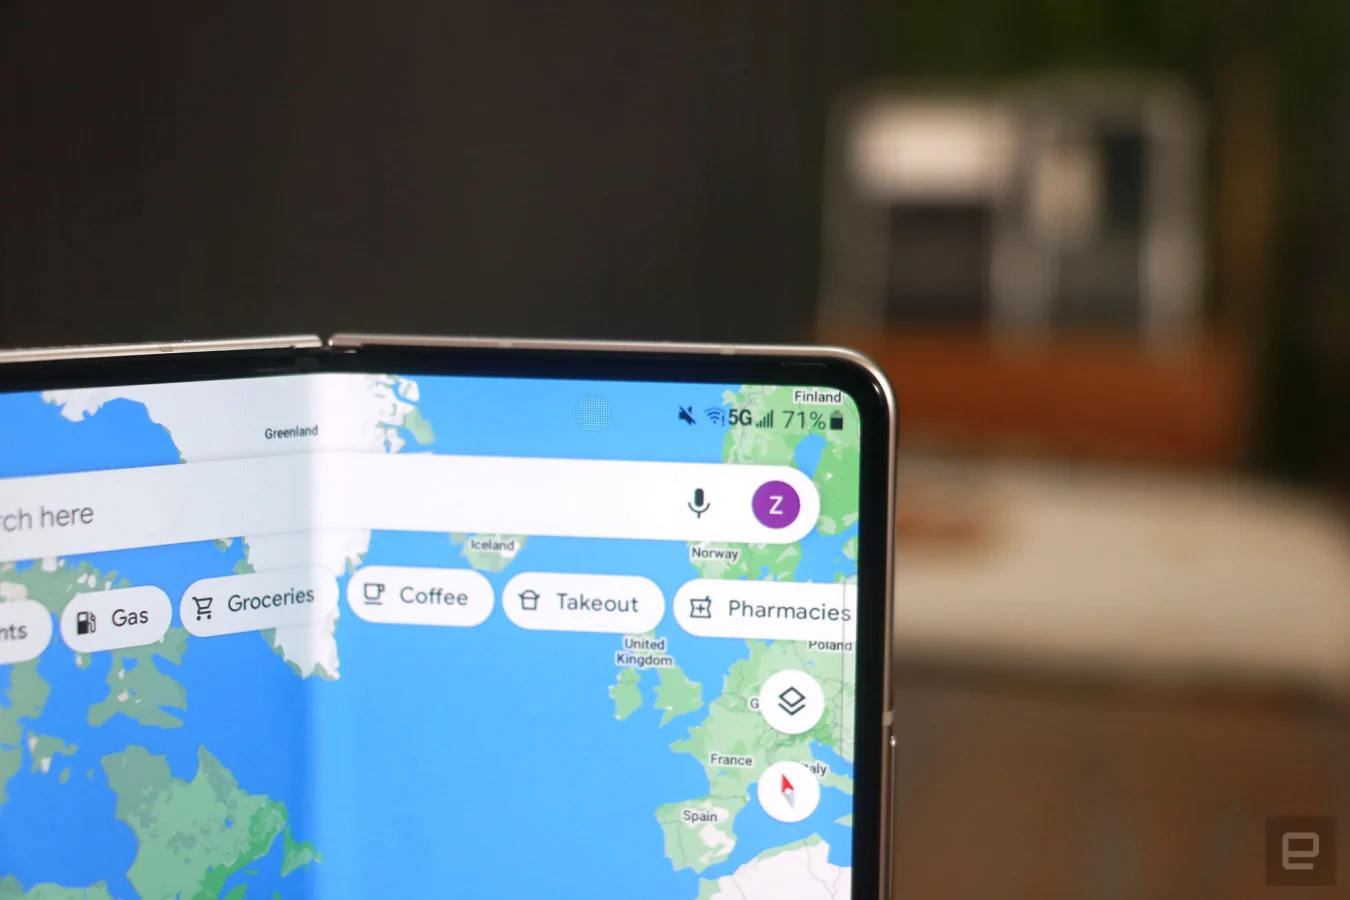 Galaxy Z Fold 3 close up on the under display camera with Google Maps open onscreen.